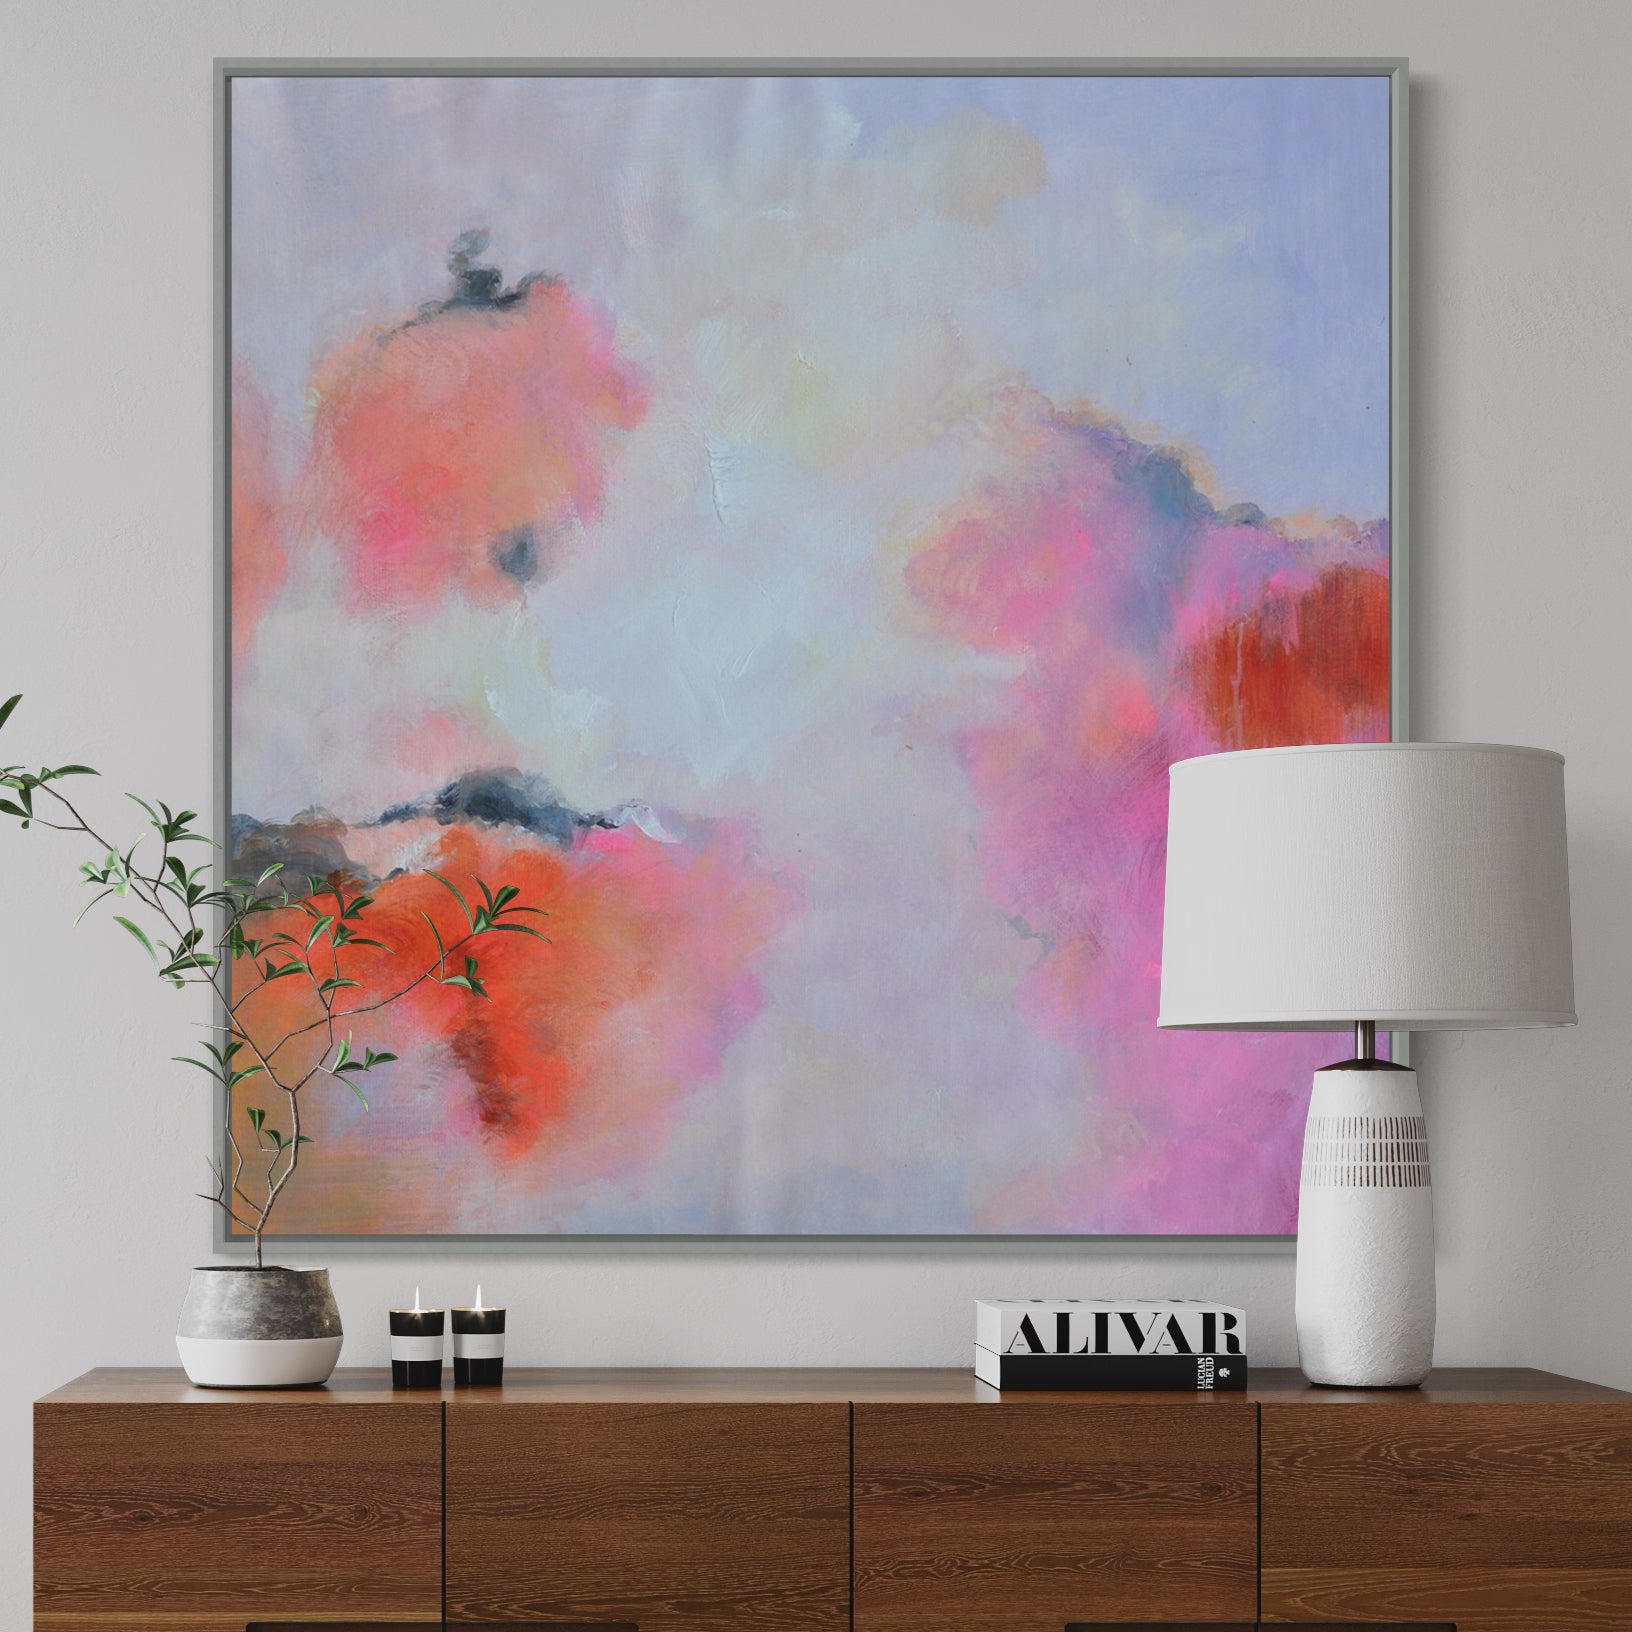 Cotton Candy, Gallery Wrap (With Bleed) / 100x100cm